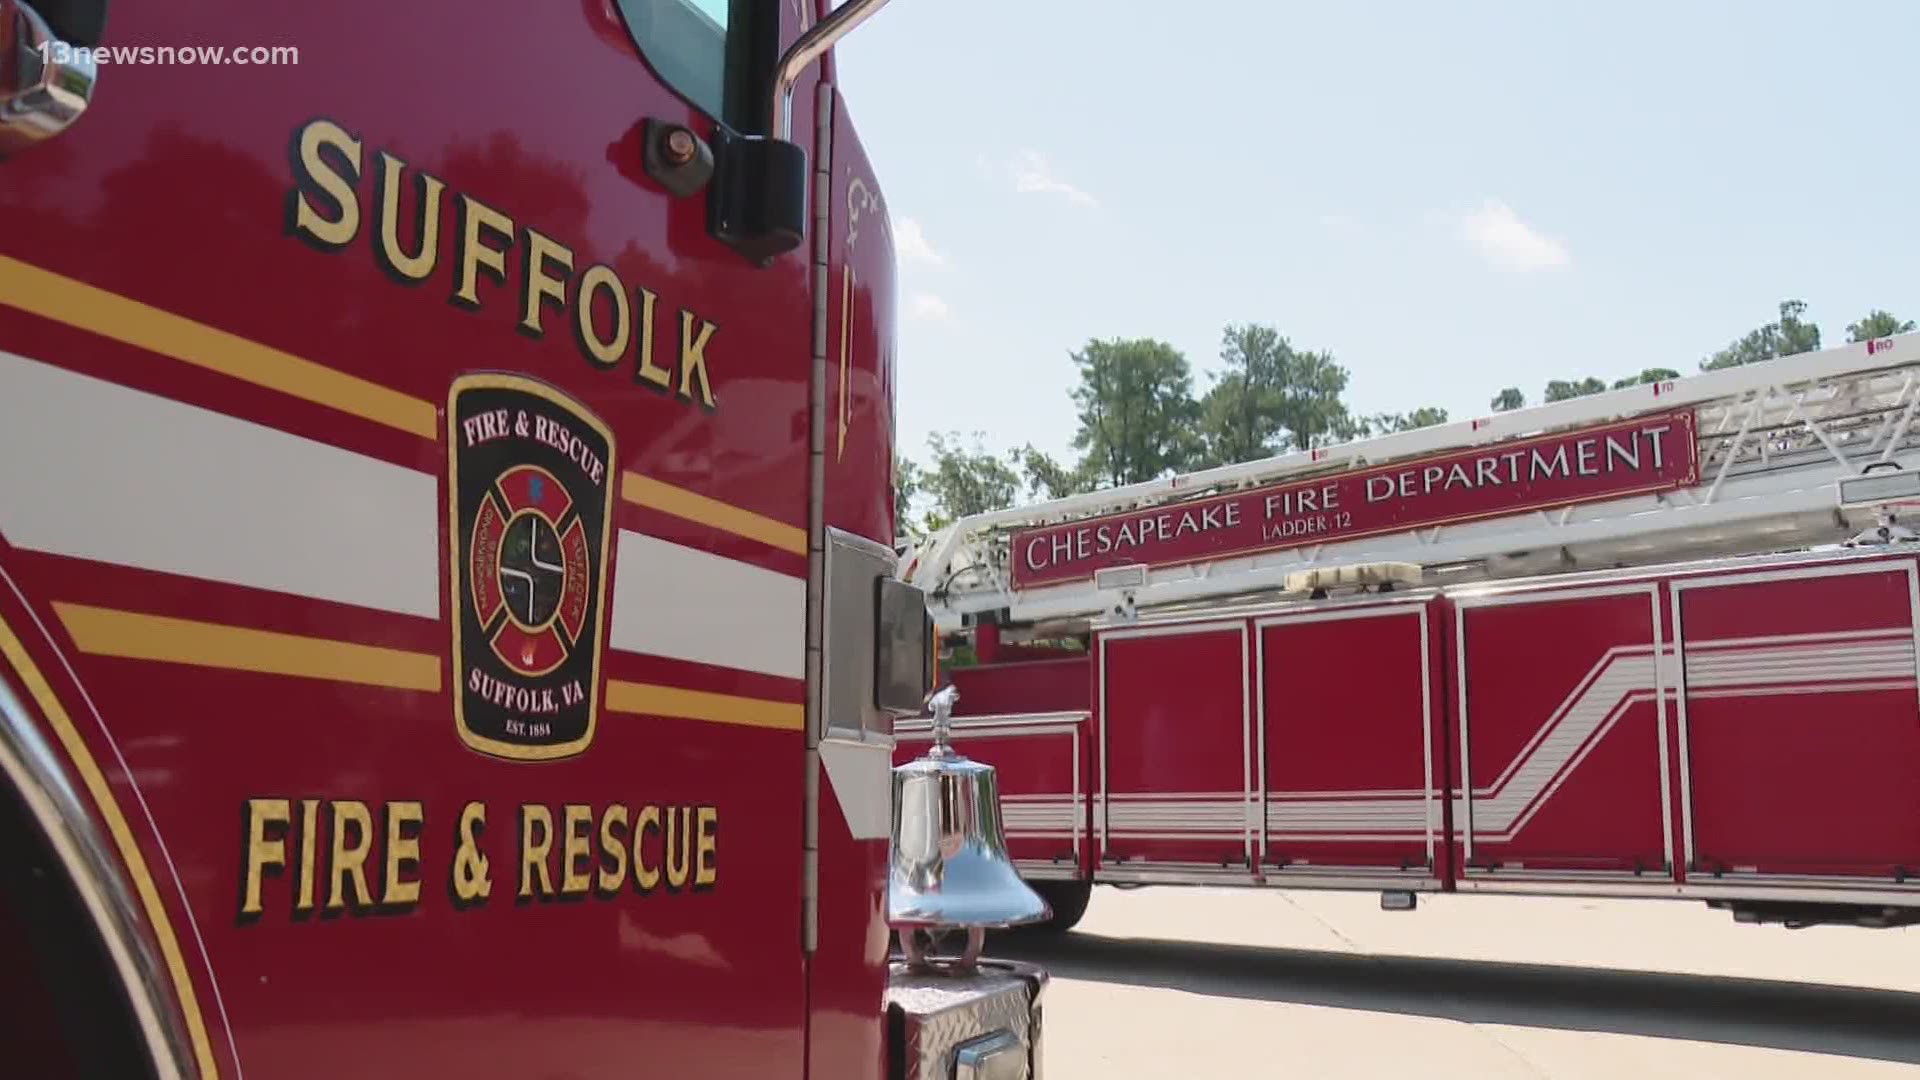 Suffolk Fire & Rescue and the Chesapeake Fire Department launched the Automatic Aid program to enhance response times to emergency calls.